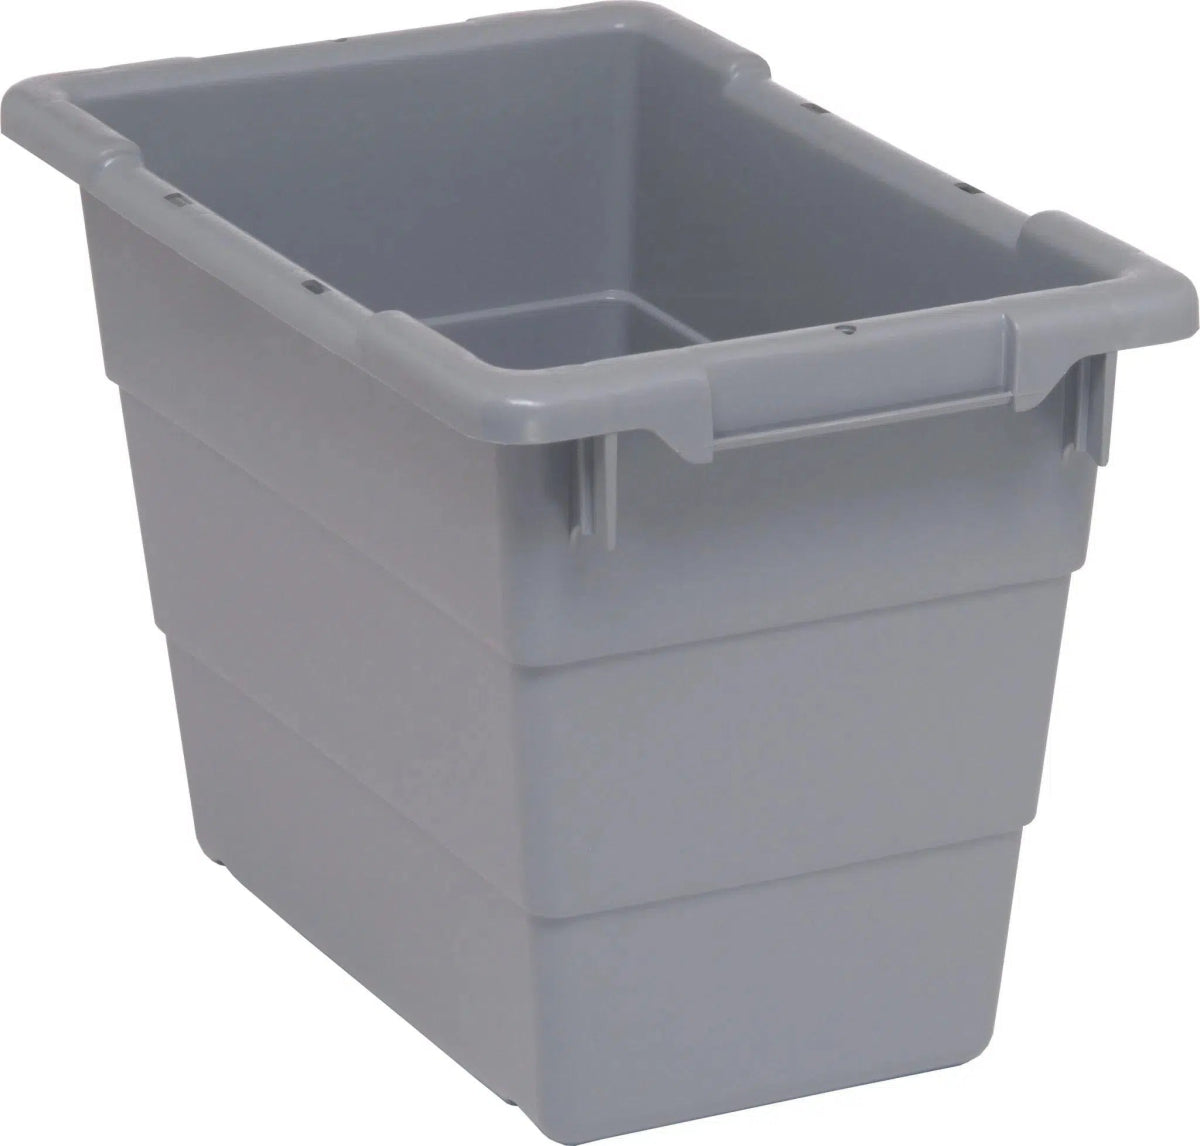 T17-11-12 | Pack of 6 - Industrial 4 Less - TUB1711-12GY